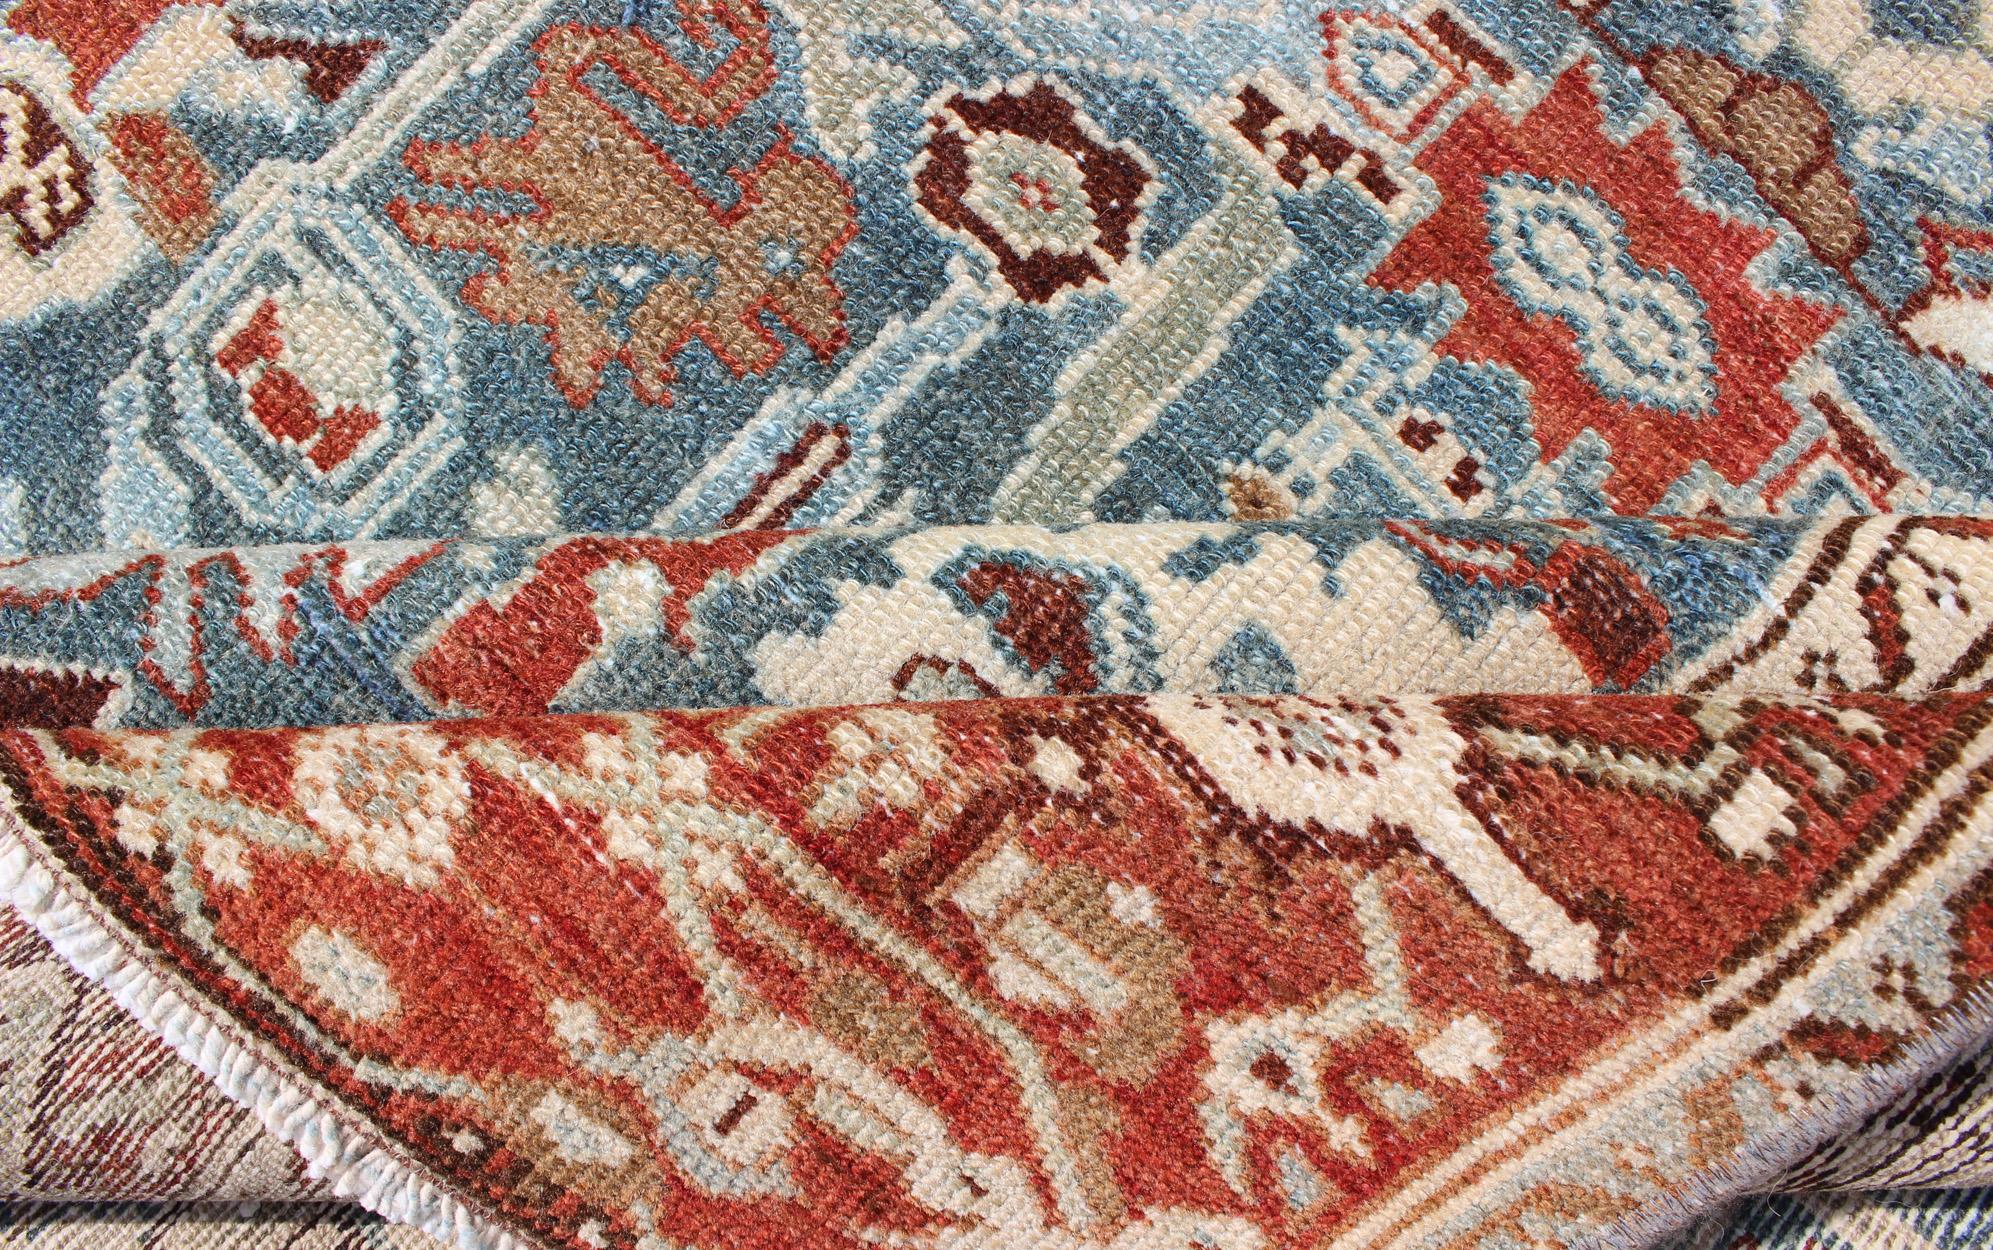 Early 20th Century Colorful Antique Persian Malayer Rug with Expansive Blossom Design For Sale